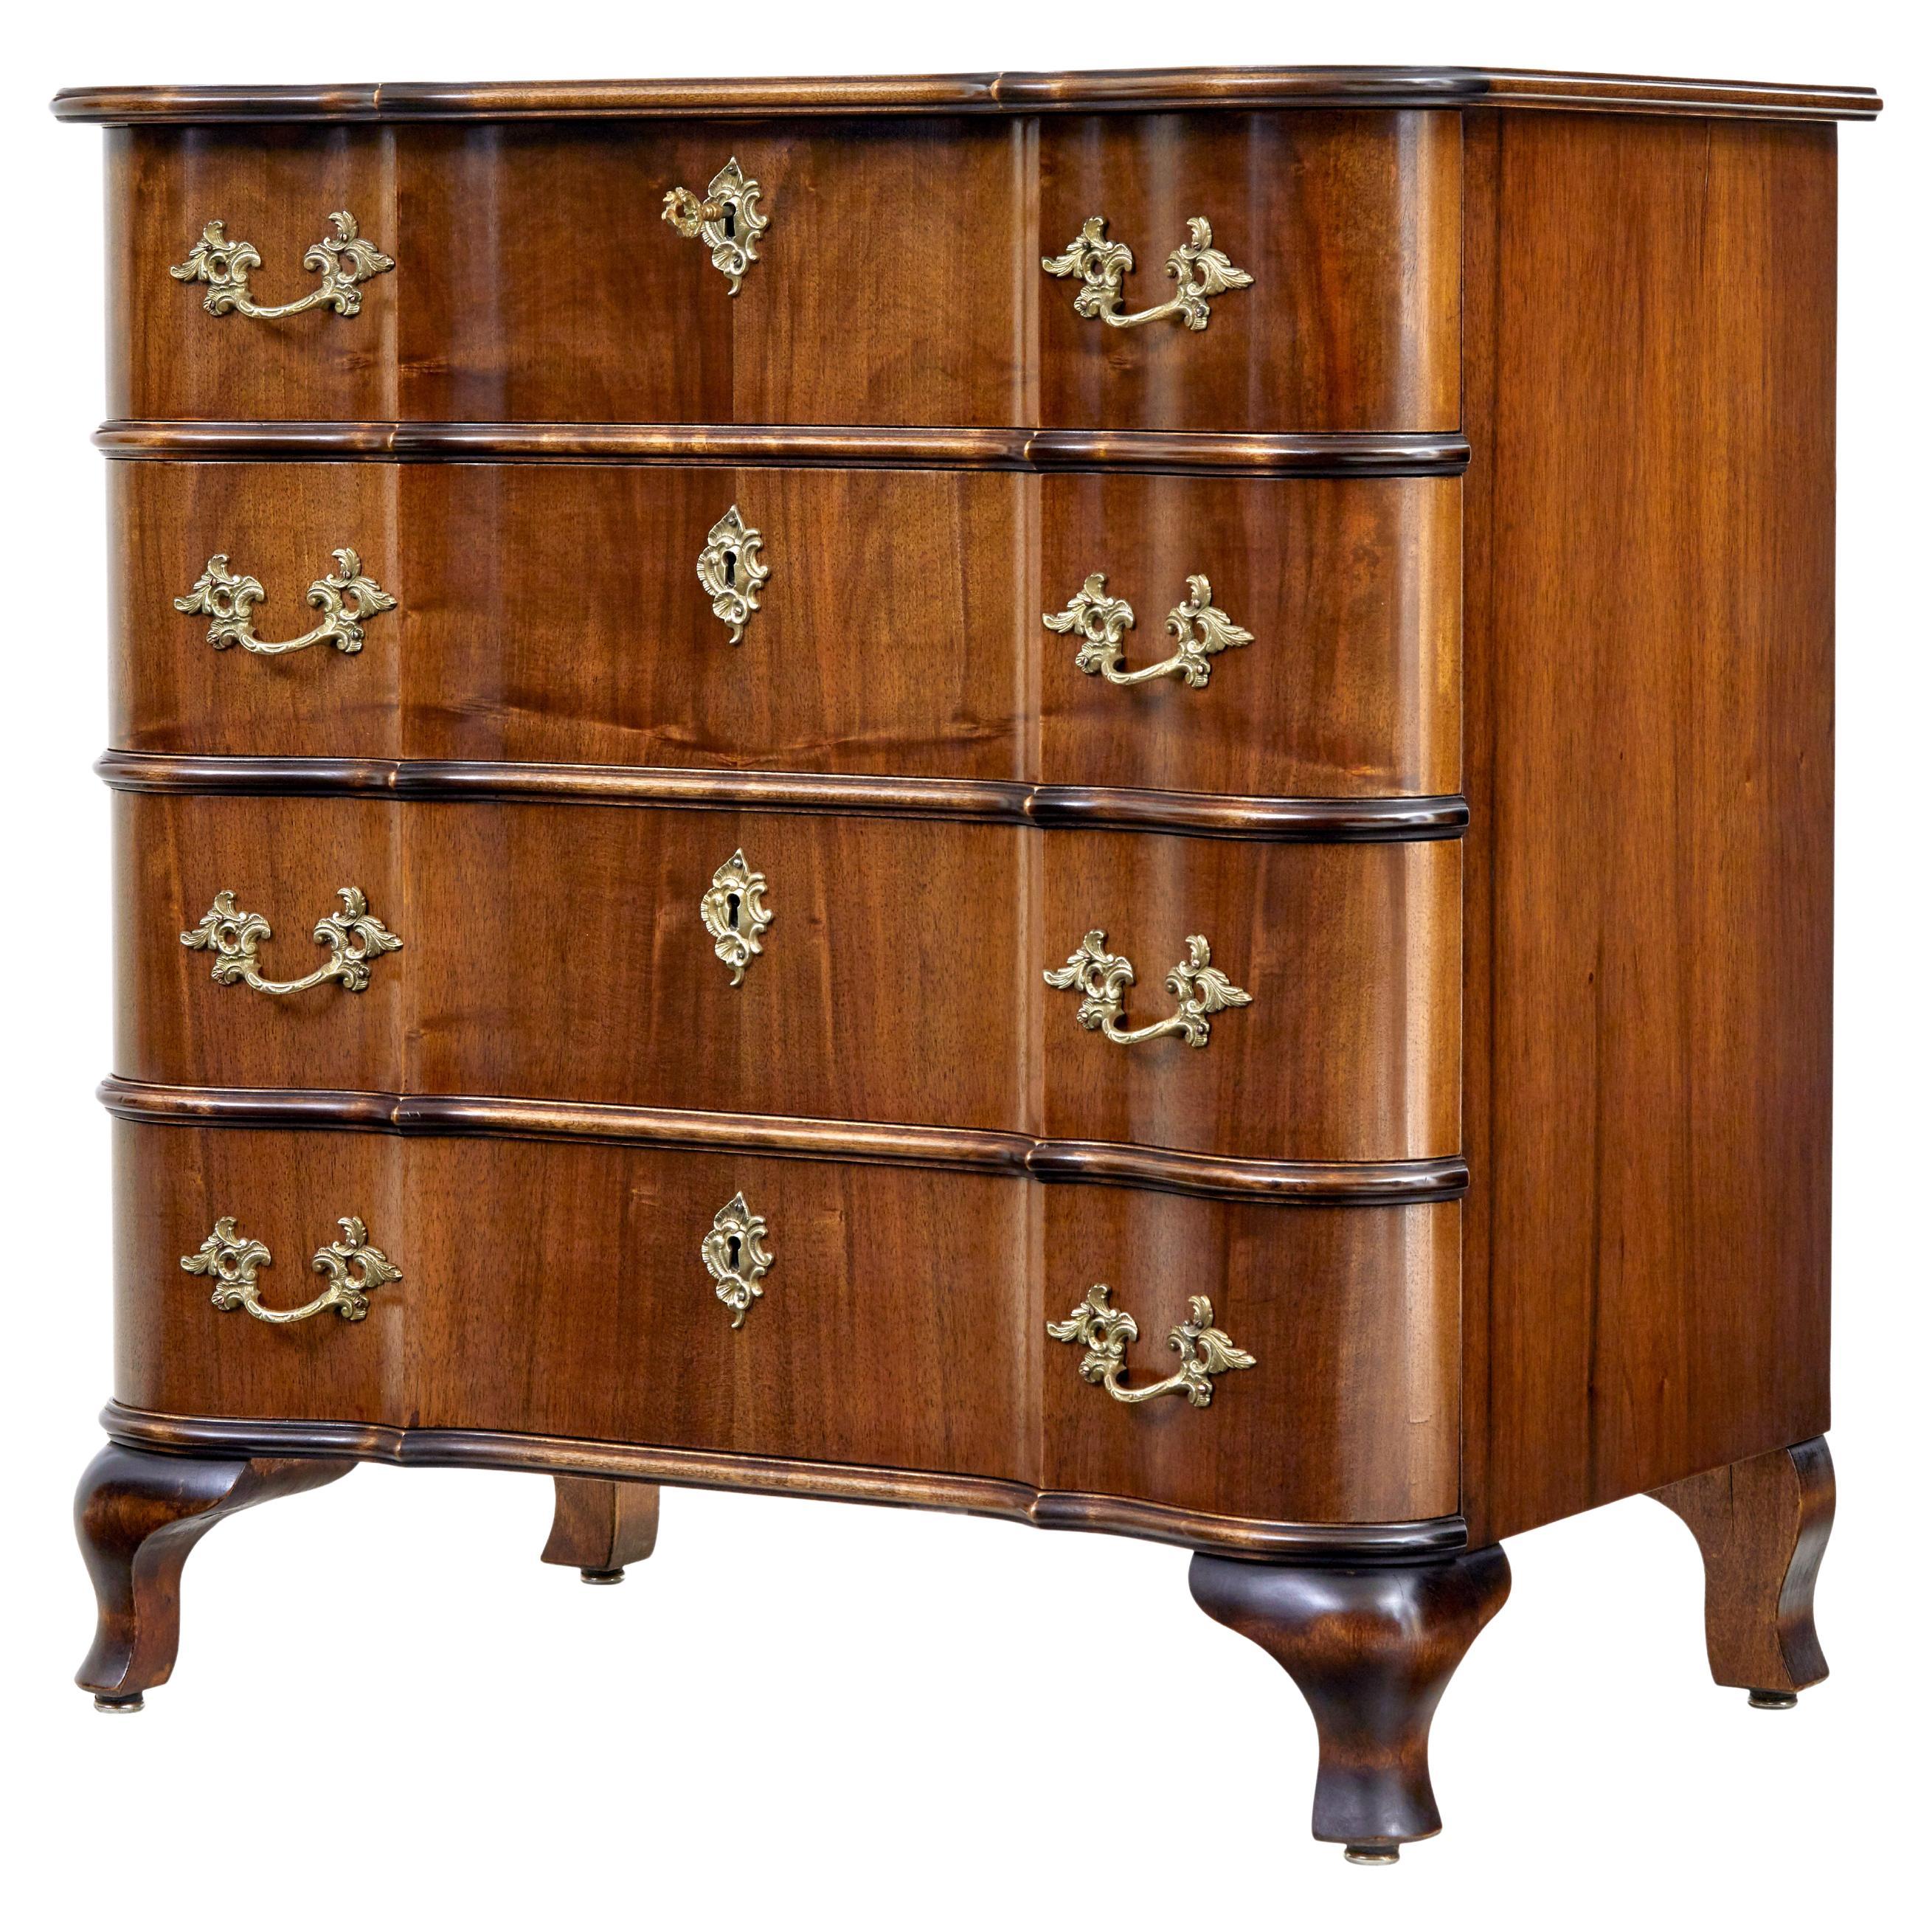 Mid 20th century baroque revival walnut chest of drawers For Sale